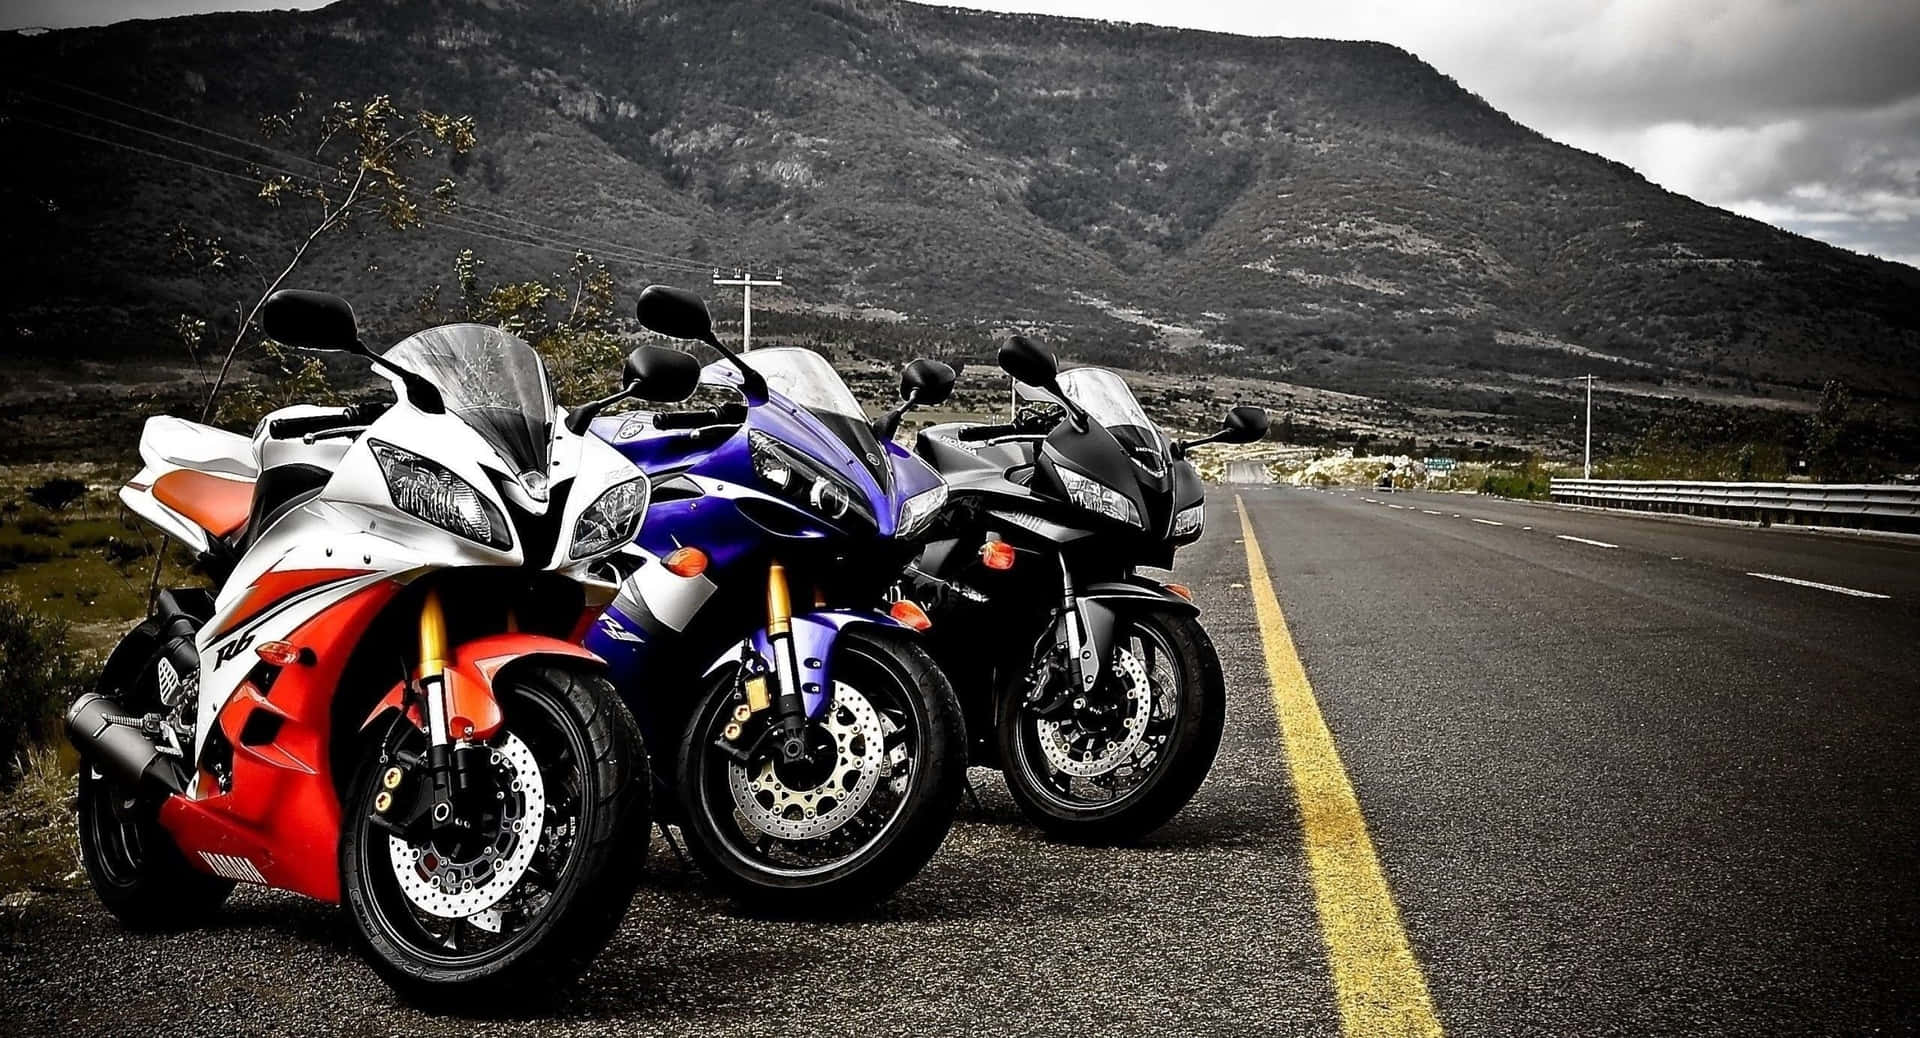 Three Motorcycles Parked On The Road